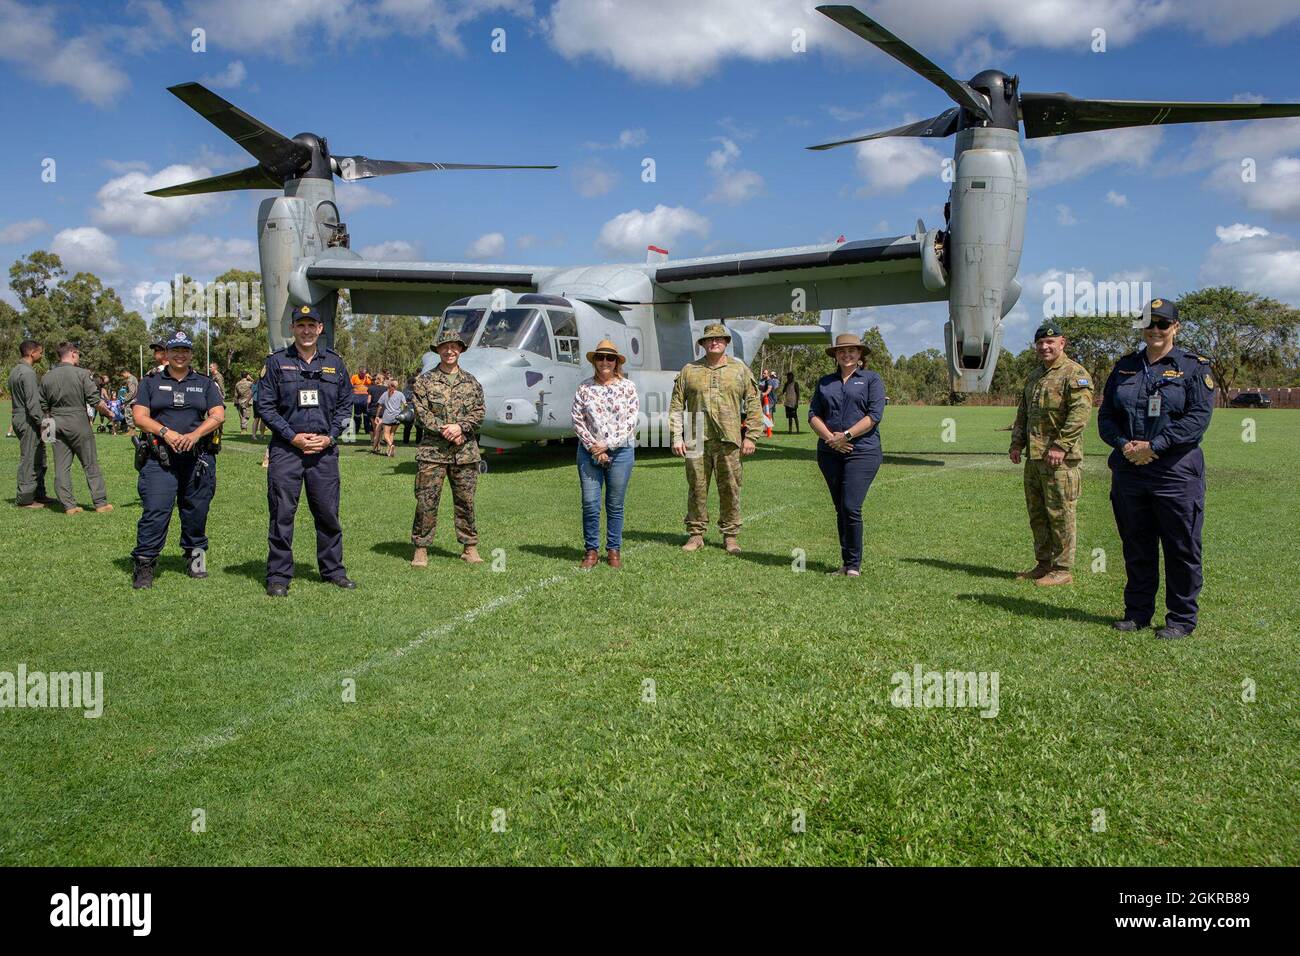 From left to right: Senior Aboriginal Police Officer Natasha Gregory; Border Force Officer Nigel Tait; U.S. Marine Corps Col. David M. Banning, commanding officer of Marine Rotational Force – Darwin; Ali Mills, chief executive officer of the Nhulunbuy Corporation; Australian Army Col. Marcus Constable, commanding officer of Headquarters Northern Command; Sophie Szylkarski, manager of communities and social performance – Gove Operations with Rio Tinto; Australian Army Lt. Col. Dan Gosling, operations officer with HQ NORCOM; and Senior Border Force Officer Carolyn McDonald take a group photo in Stock Photo